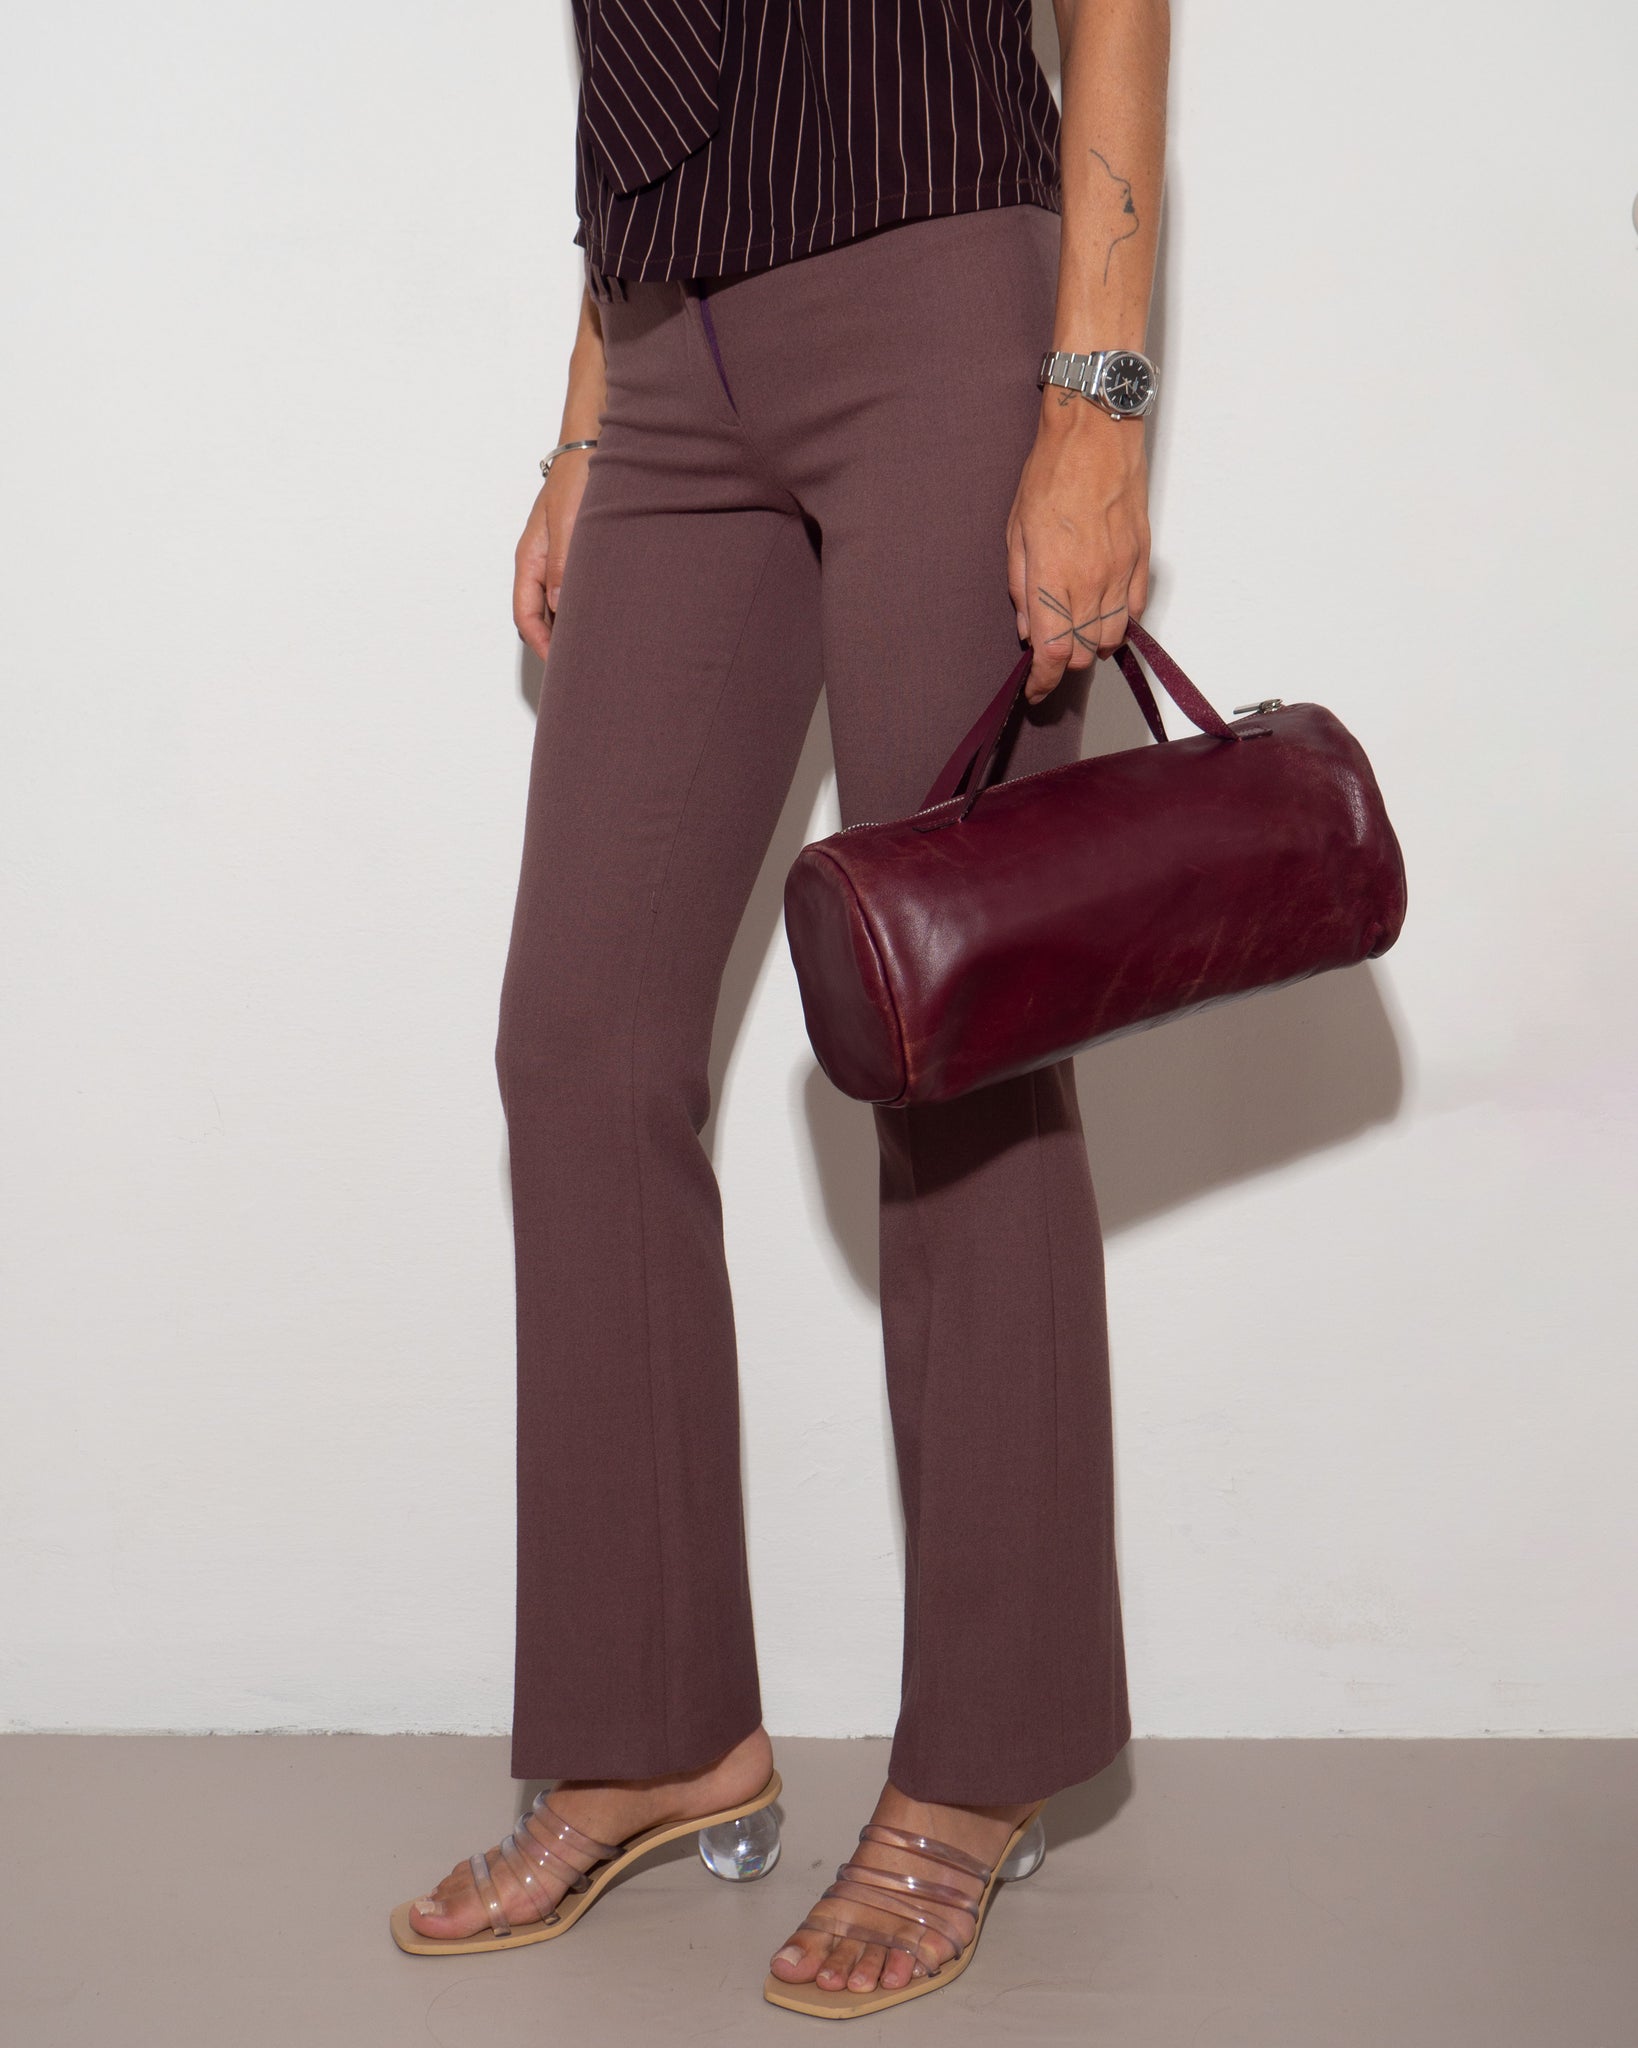 Rose Taupe Pants